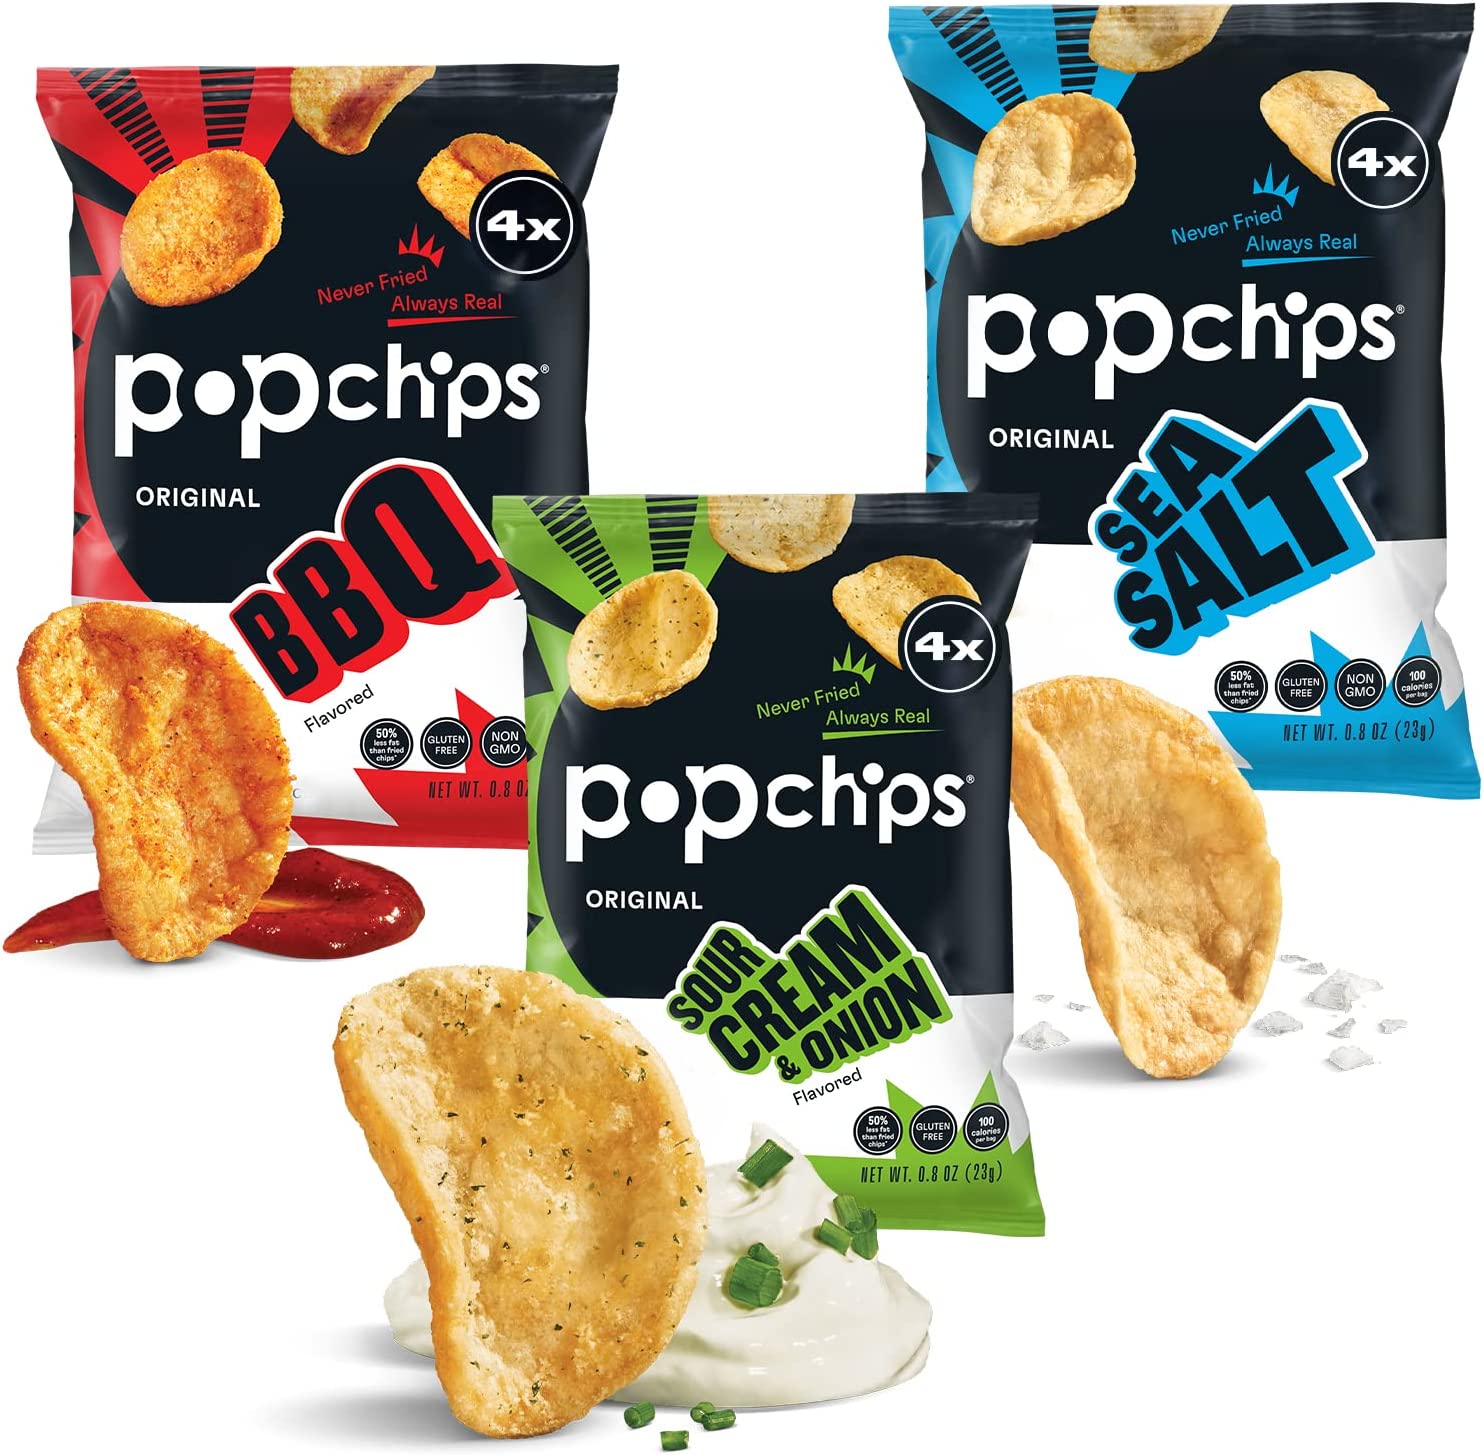 Popchips Potato Chips Variety Pack, Sea Salt, BBQ, Sour Cream & Onion, 12ct Single Serve 0.8oz Bags, Gluten Free, Salty Snacks for Adults and Children, Non-GMO & Kosher, 100 Calories Per Bag